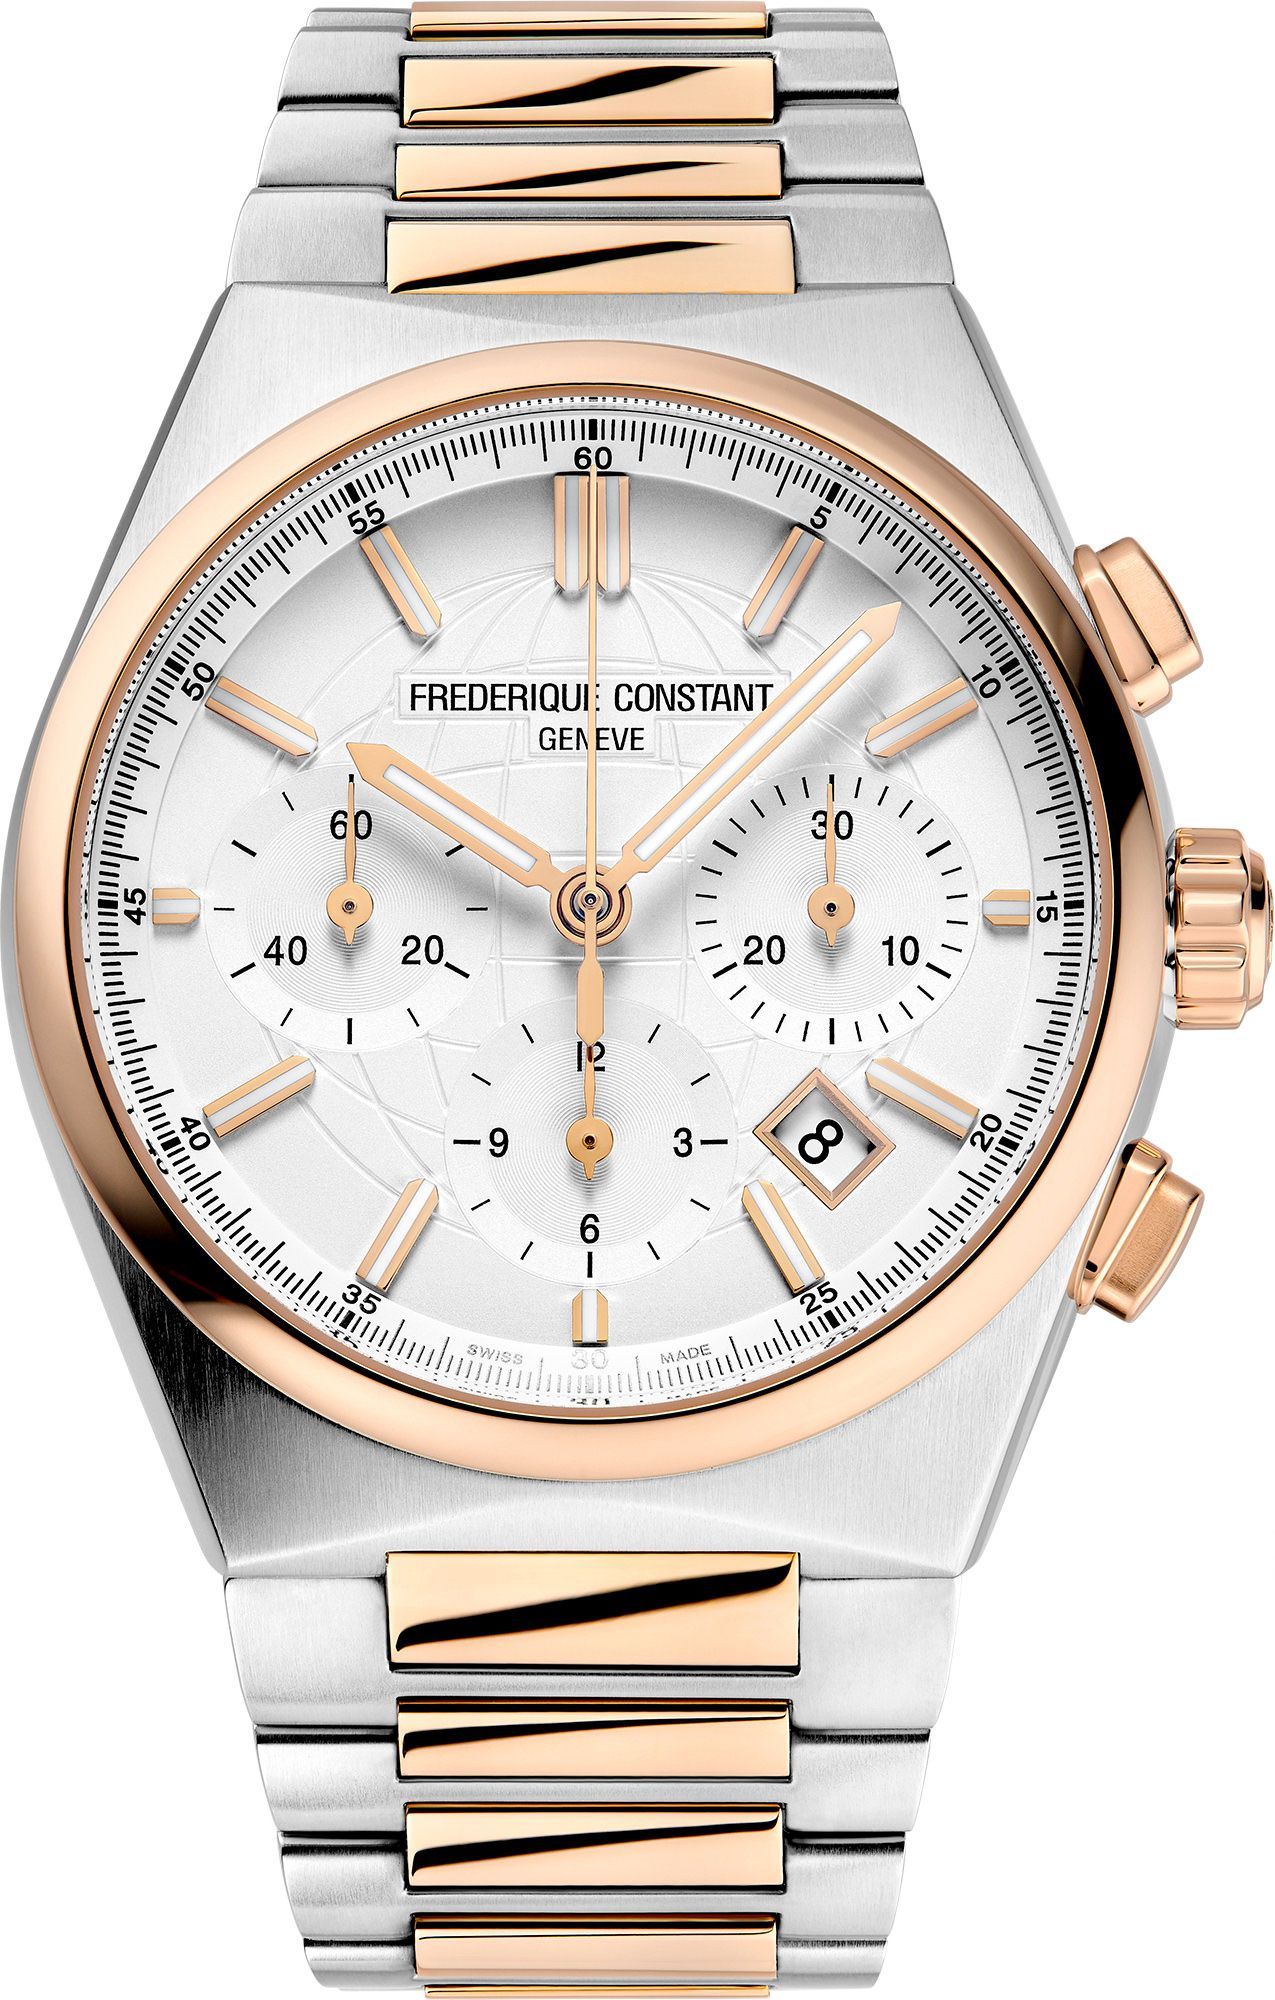 Frederique Constant Highlife Highlife Chronograph Automatic Silver Dial 41 mm Automatic Watch For Men - 1